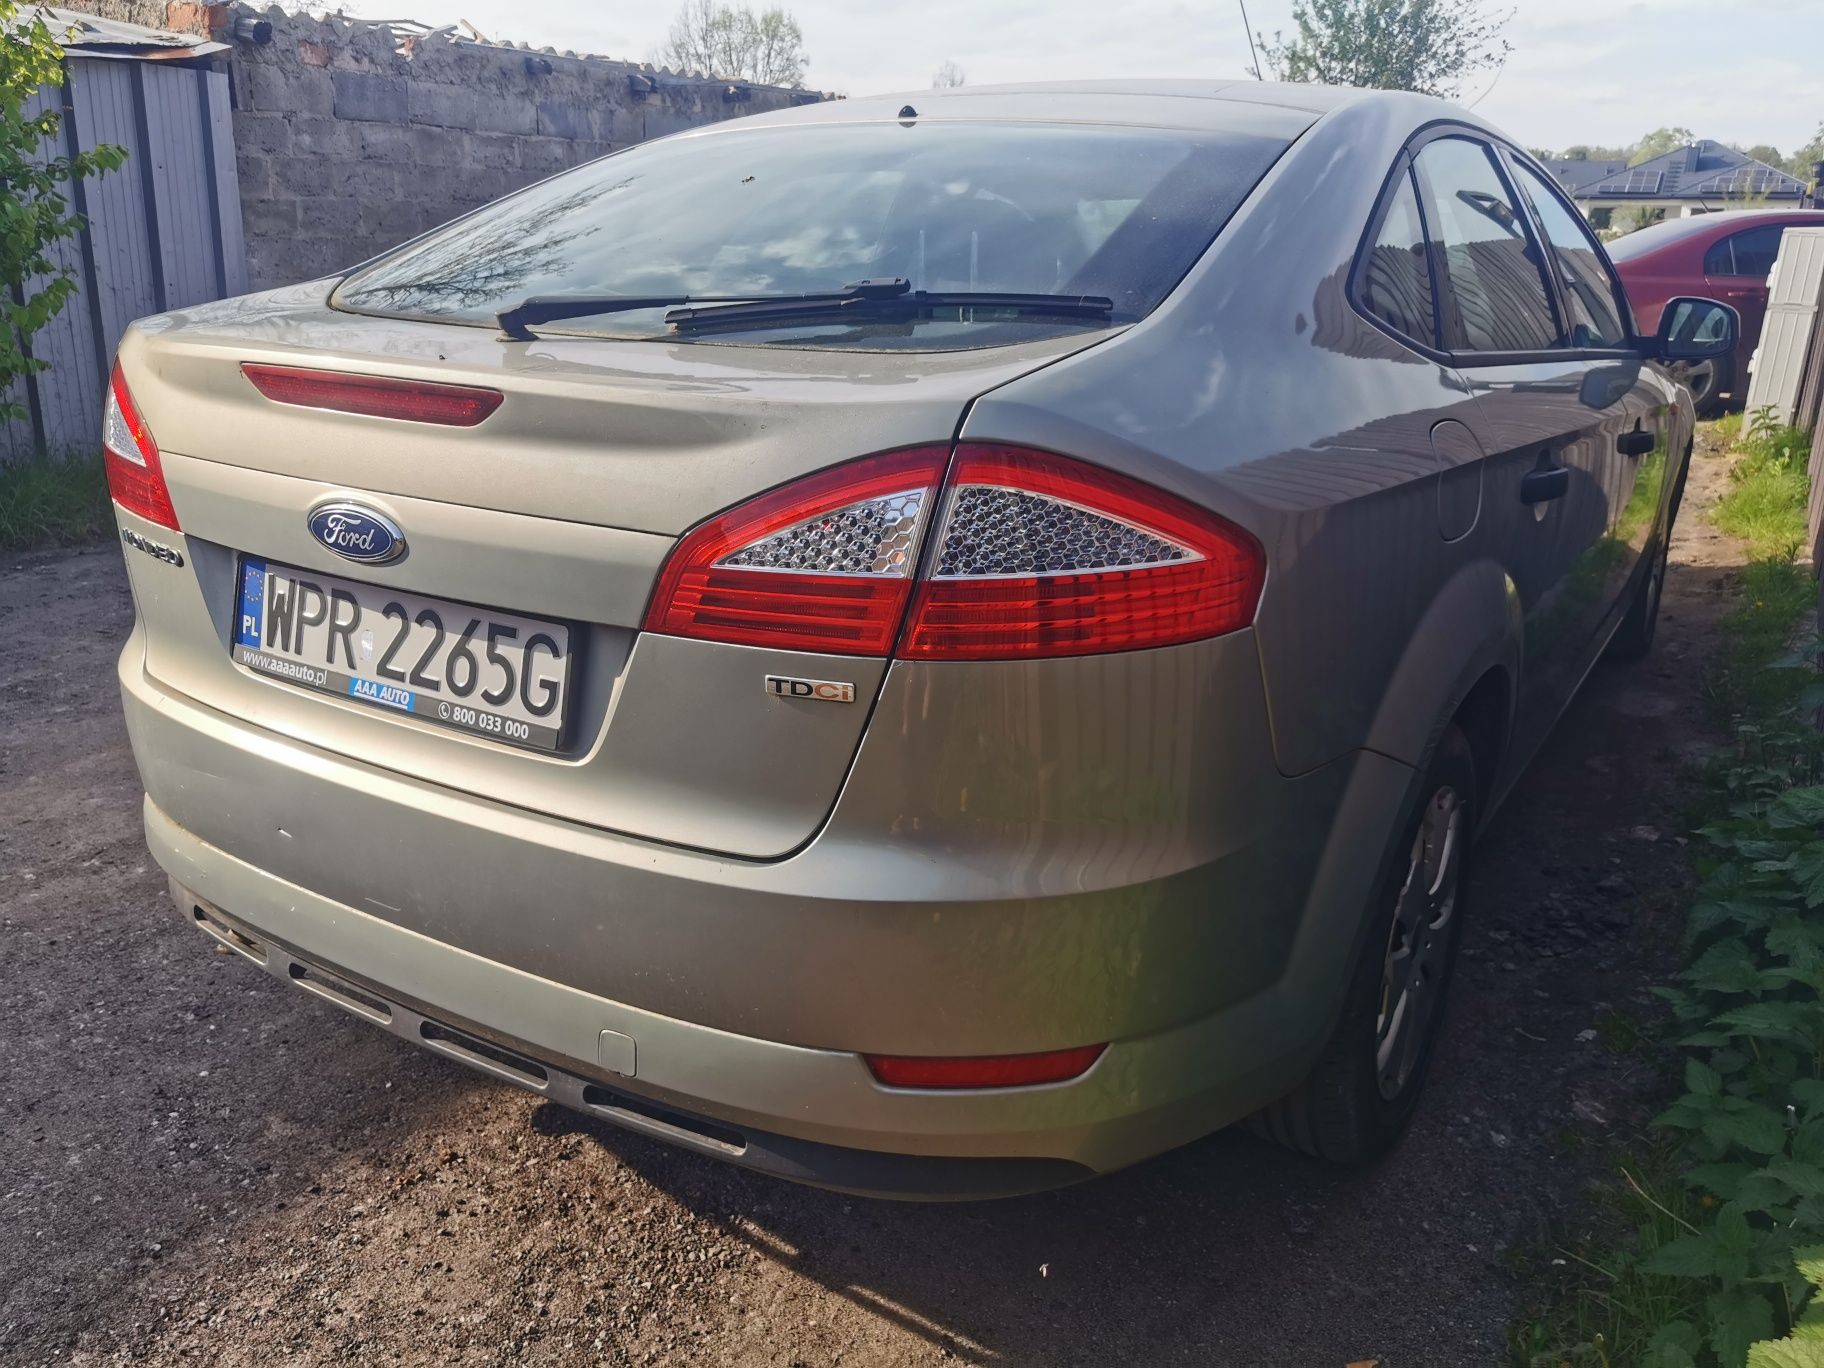 Ford Mondeo 1.8 tdci 2010r 190tys.km